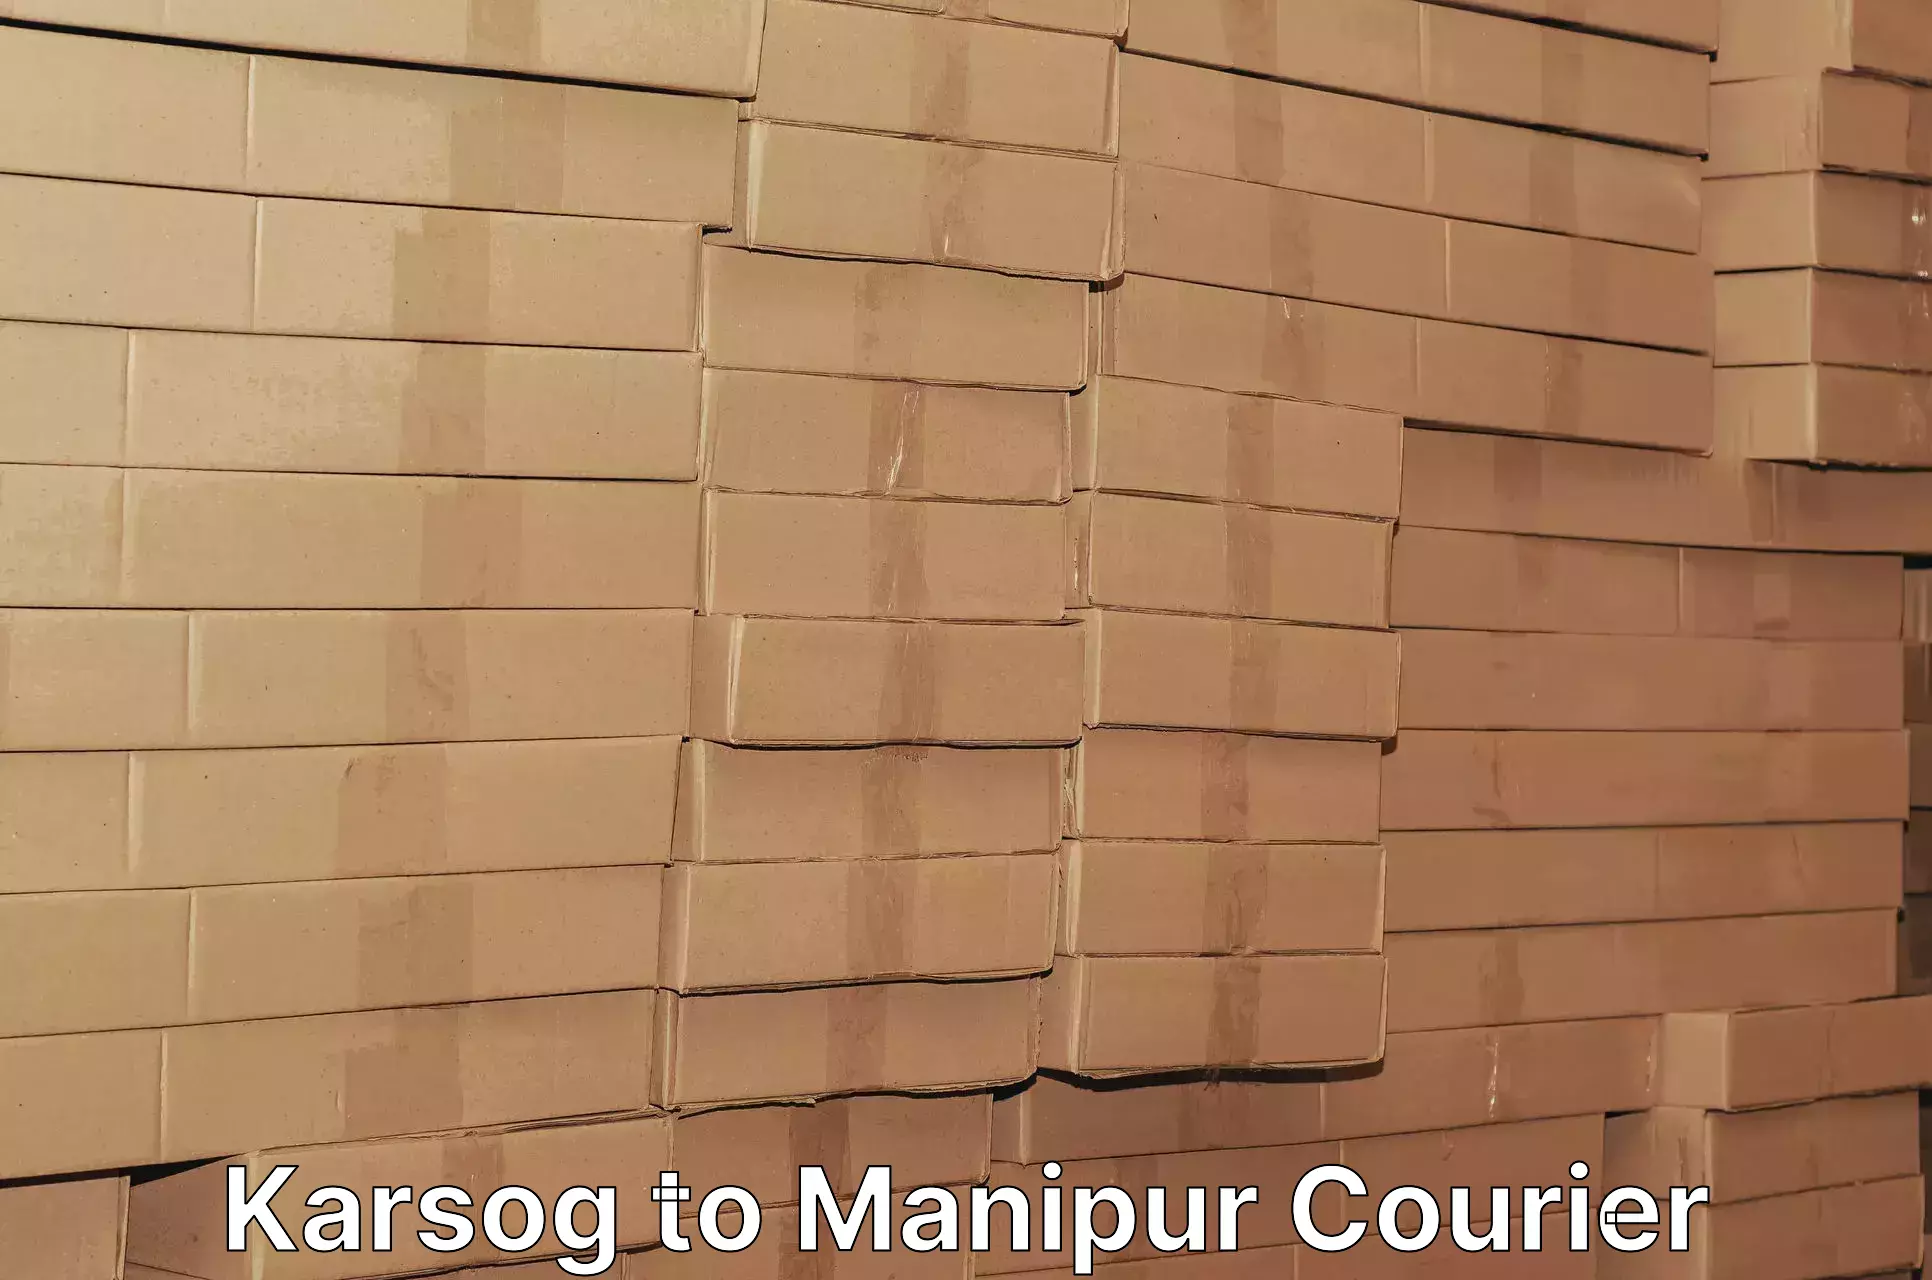 Sustainable delivery practices in Karsog to Manipur